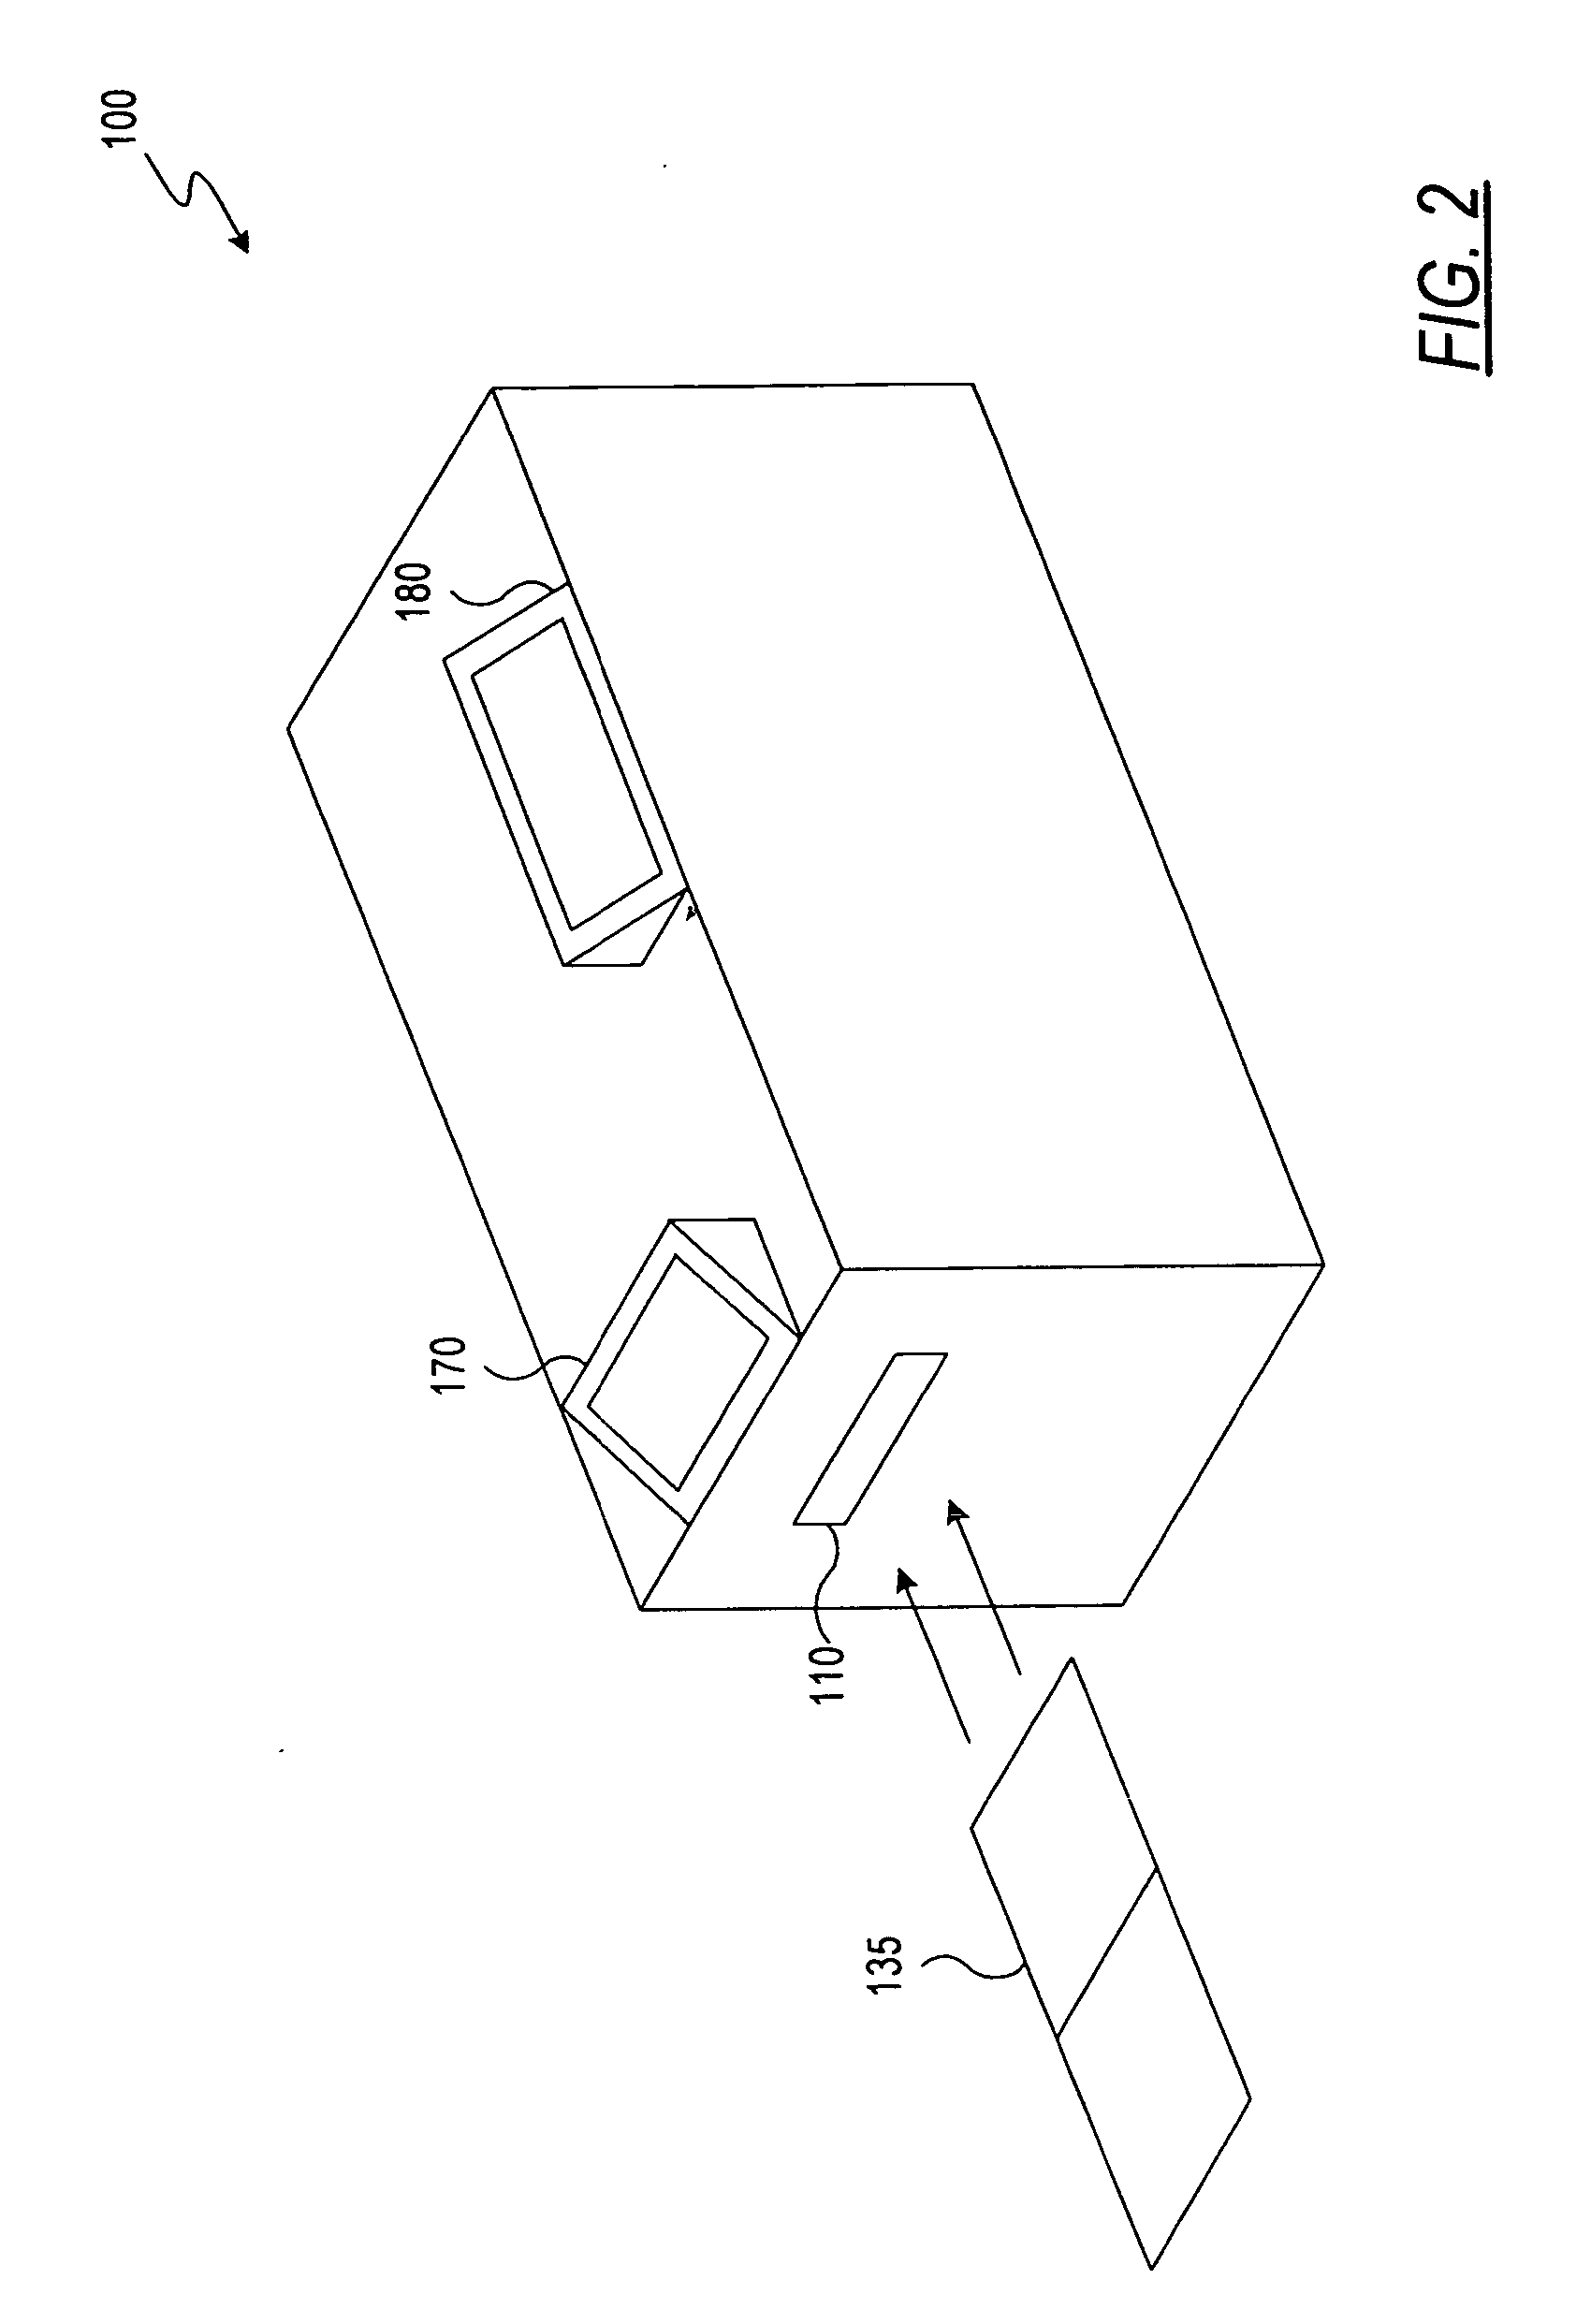 Document processing system using full image scanning